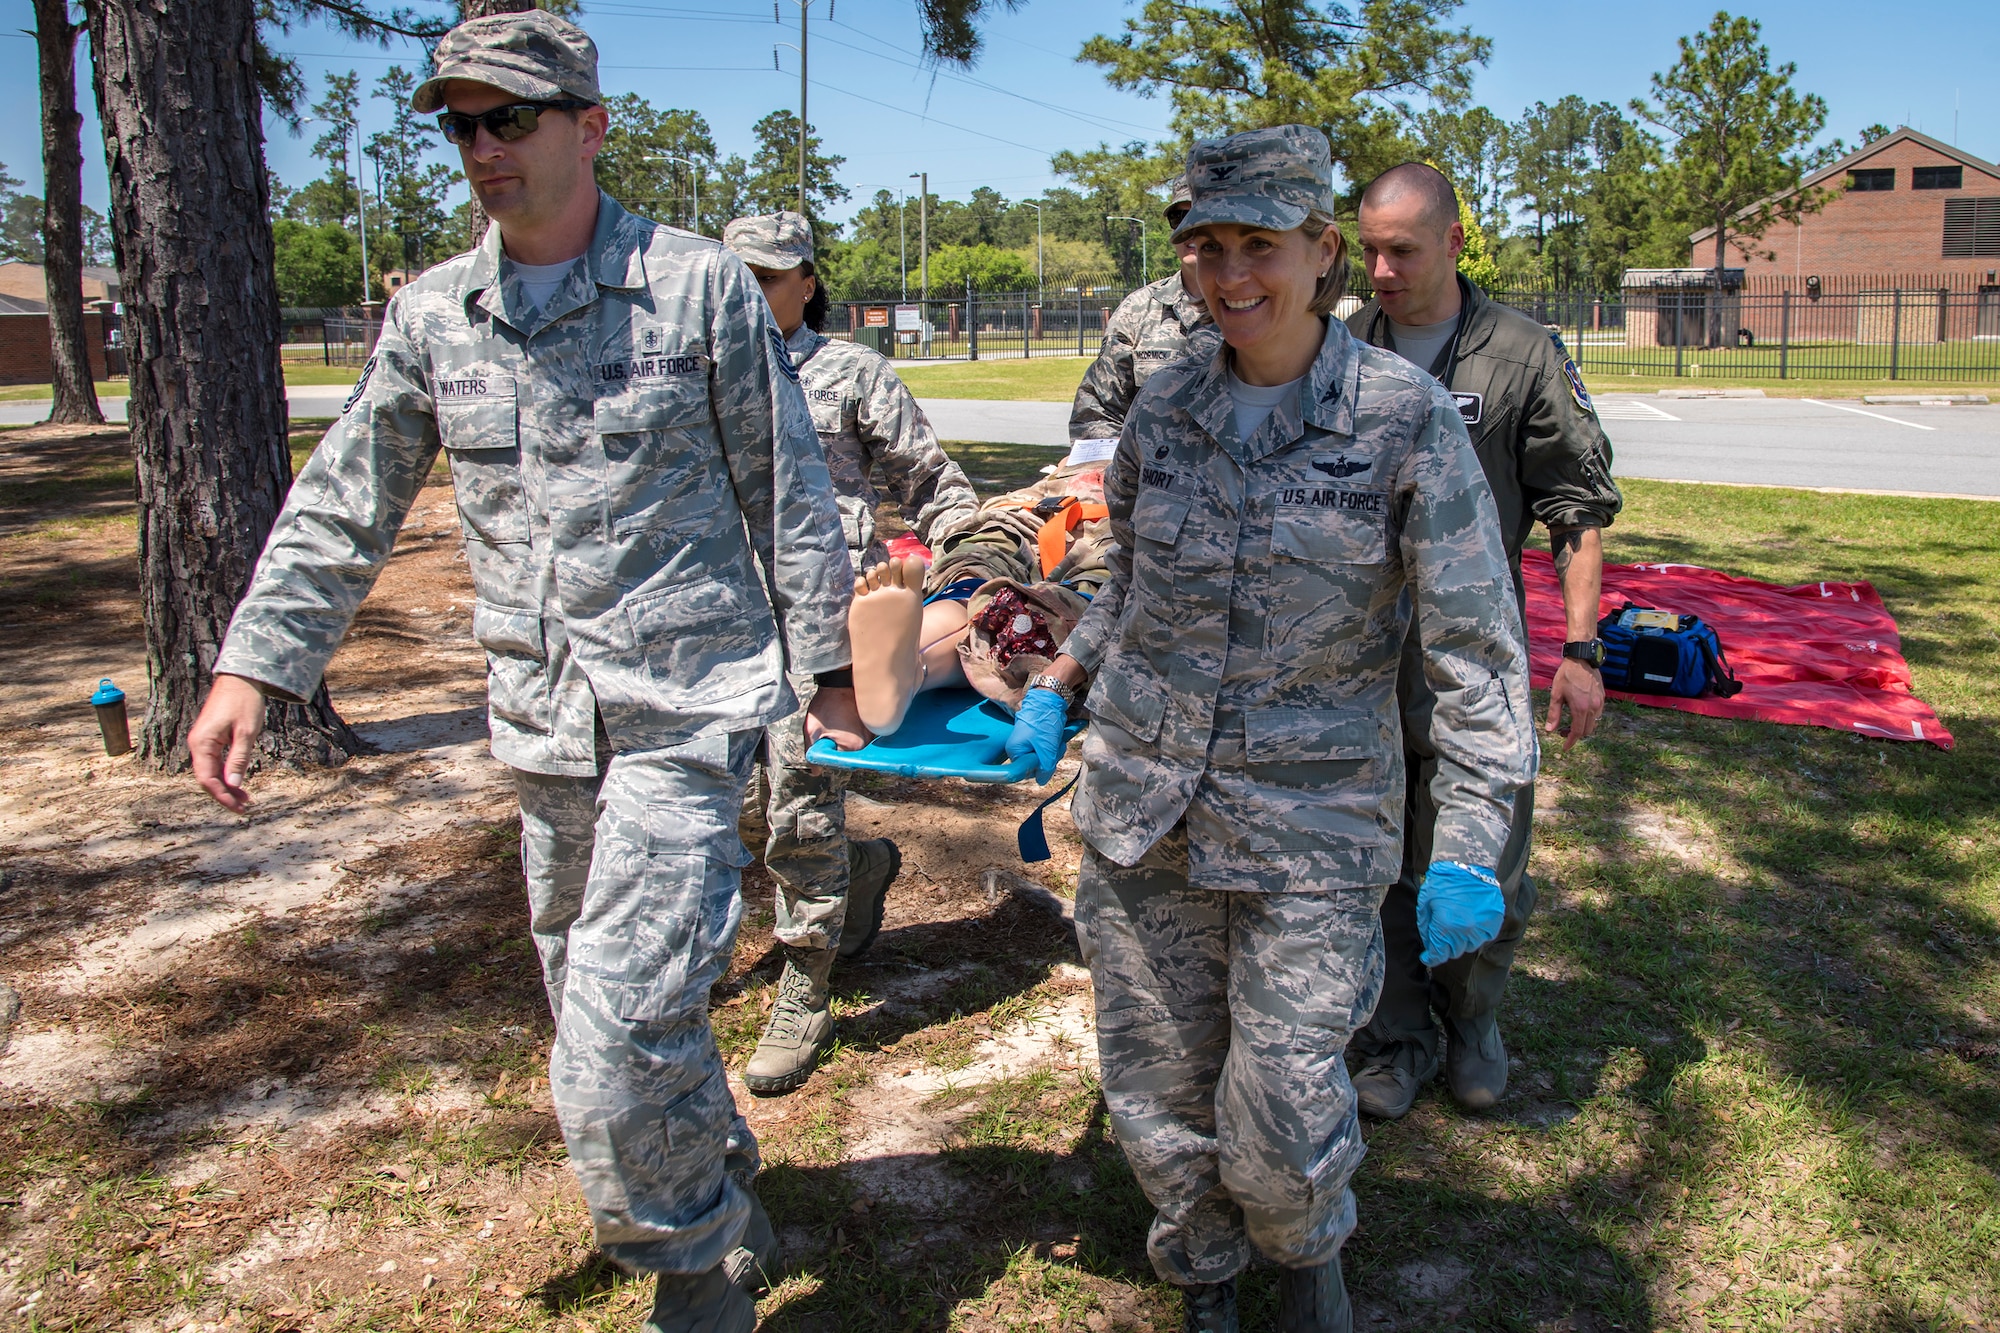 Col. Jennifer Short, right, 23d Wing commander, along with Airmen from the 23d Medical Group (MDG), carry a mannequin, April 30, 2018, at Moody Air Force Base, Ga. Short toured the 23d MDG to gain a better understanding of their overall mission, capabilities, and comprehensive duties, and was able to experience the day-to-day operations of the various units within the 23d MDG, ranging from bioenvironmental to ambulatory care. (U.S. Air Force photo by Airman 1st Class Eugene Oliver)